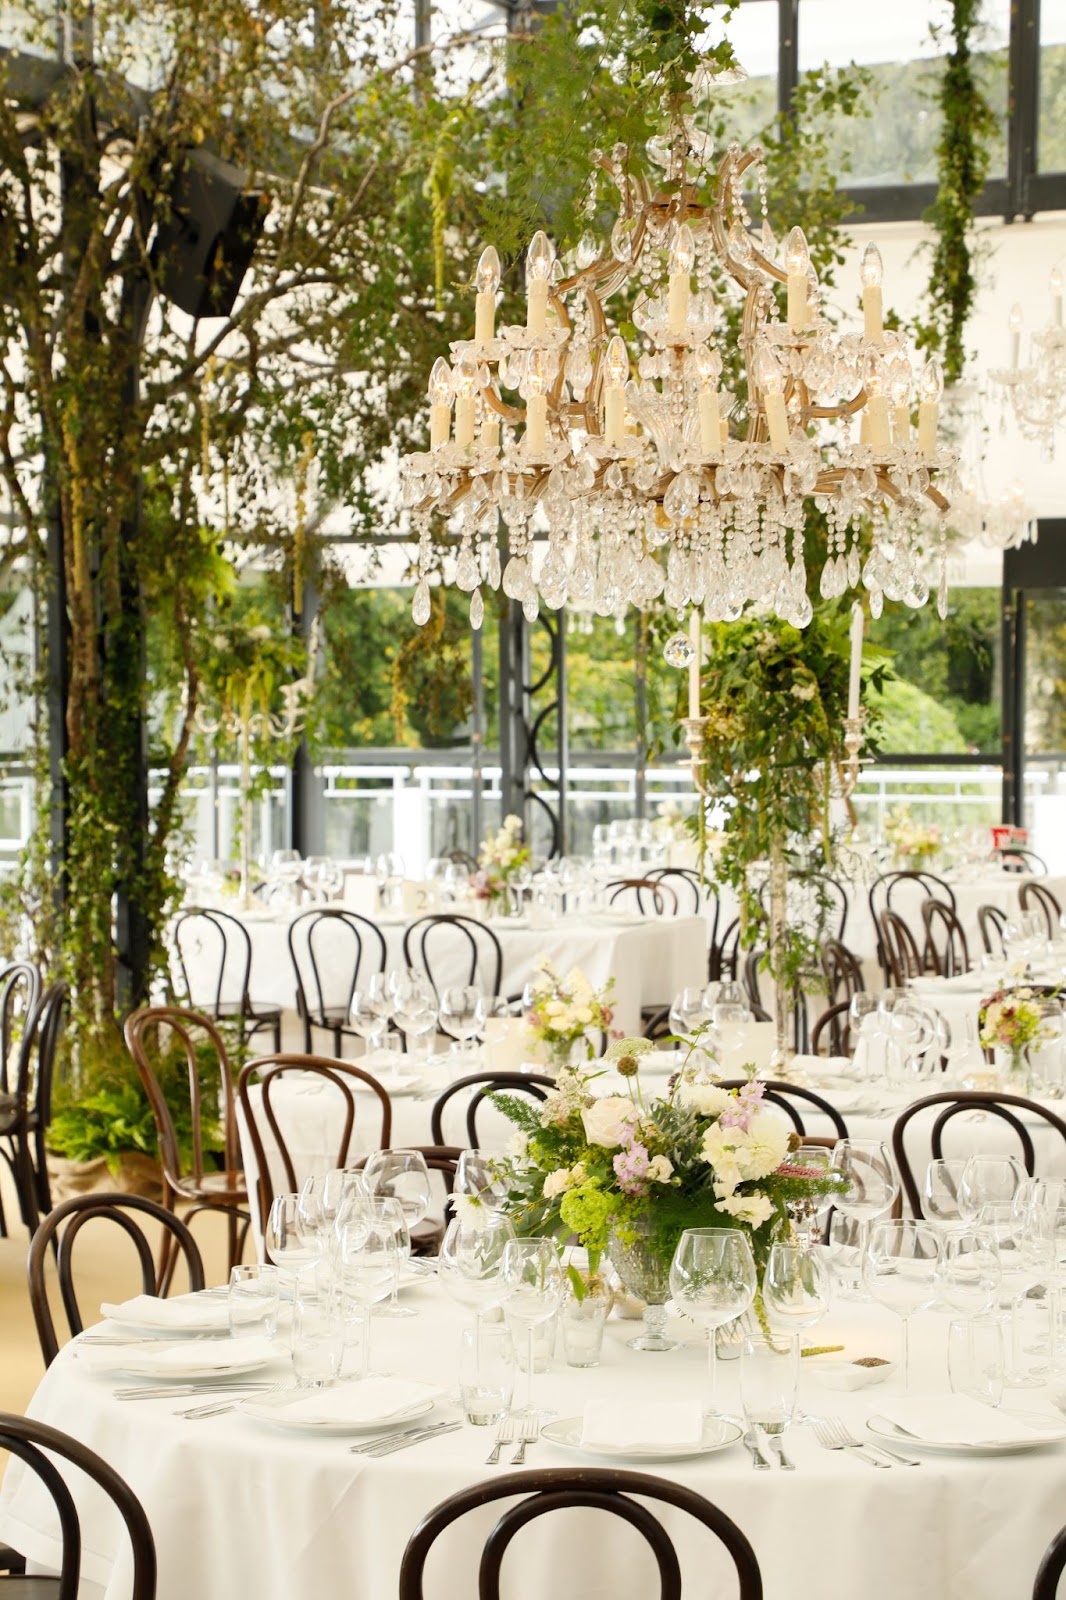 Tara Fay uses Chandeliers and florals to bring life to the wedding reception.